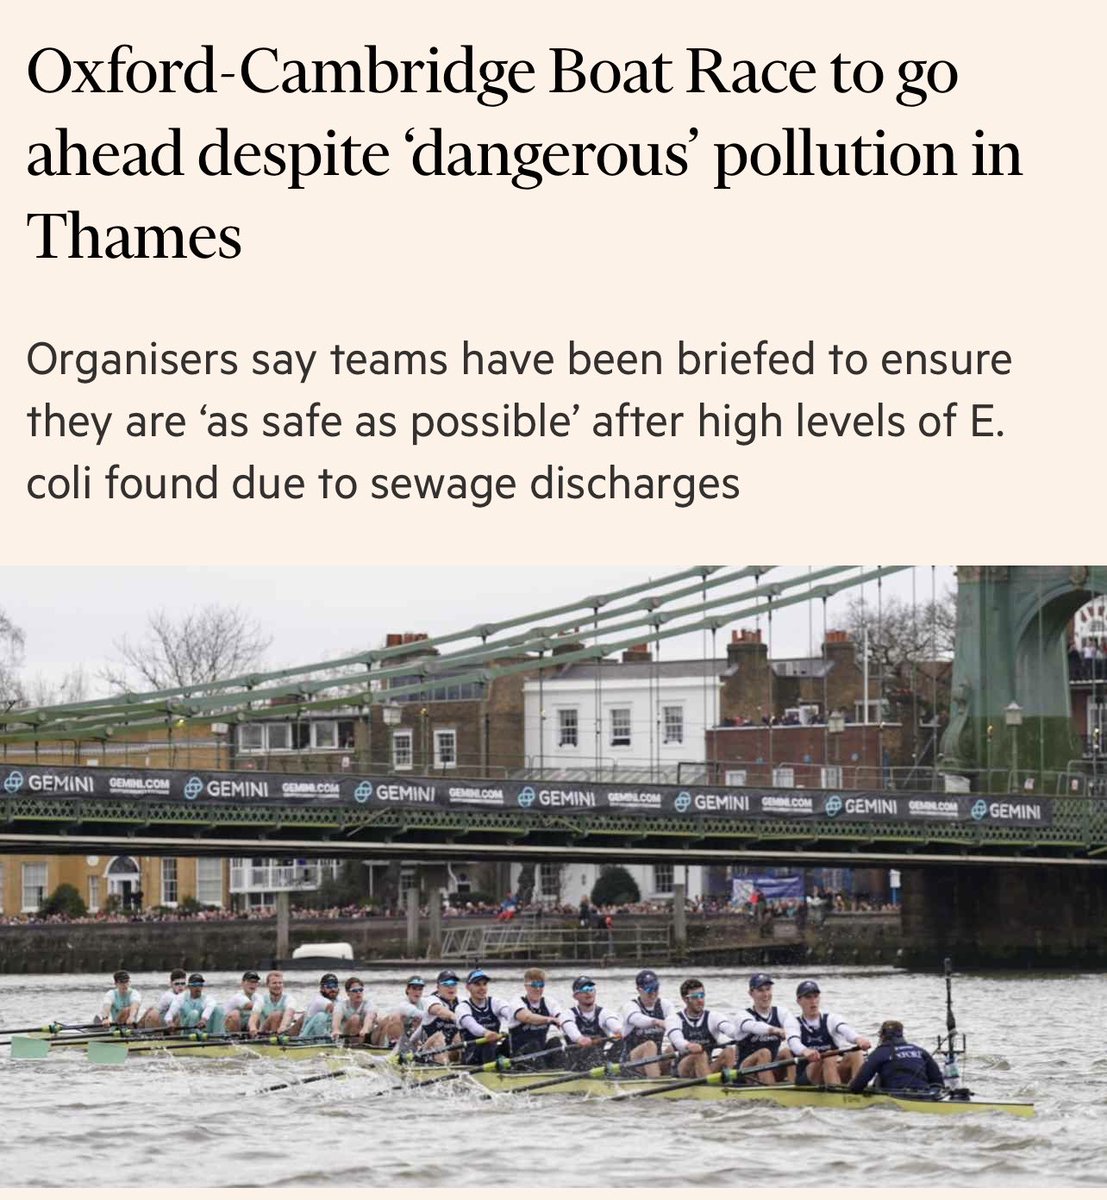 NEWS Thames Water sewage discharges cause dangerous levels of E.coli pollution for Oxford Cambridge Boat Race This Tory pursuit of profit is destroying our rivers and seas for pure greed 😡